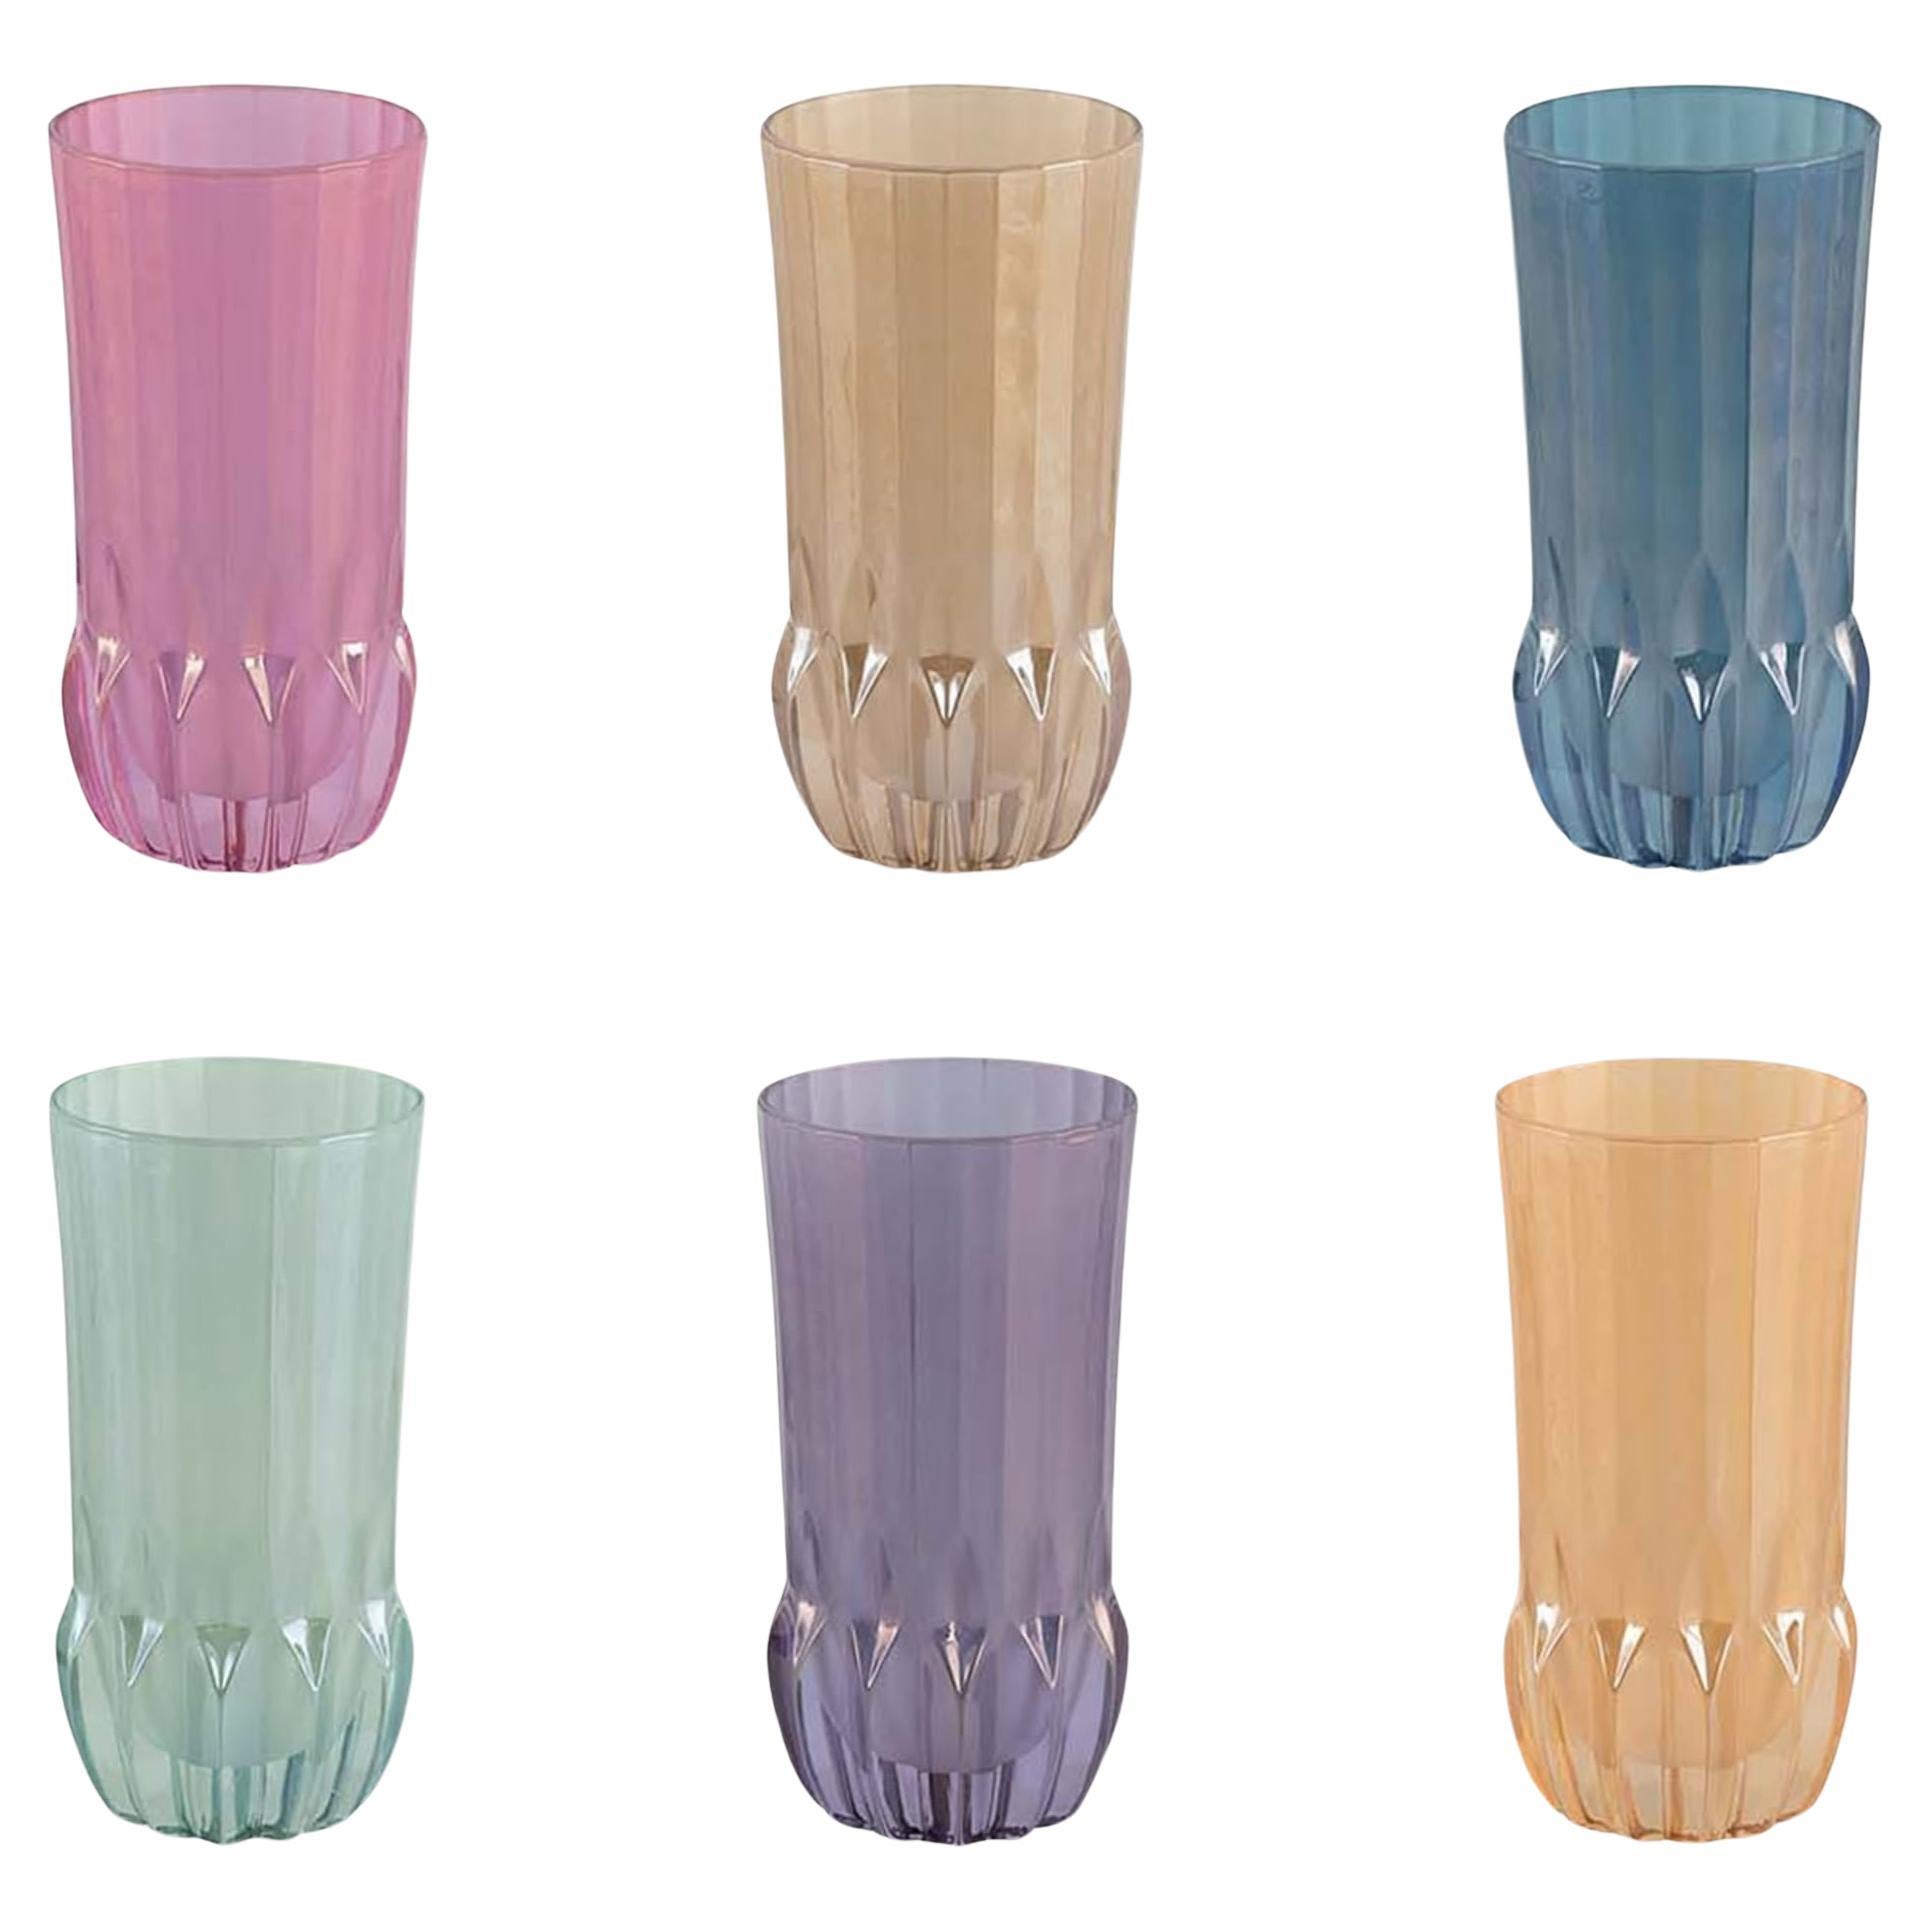 Canal Set of 6 Soft Drink Glasses